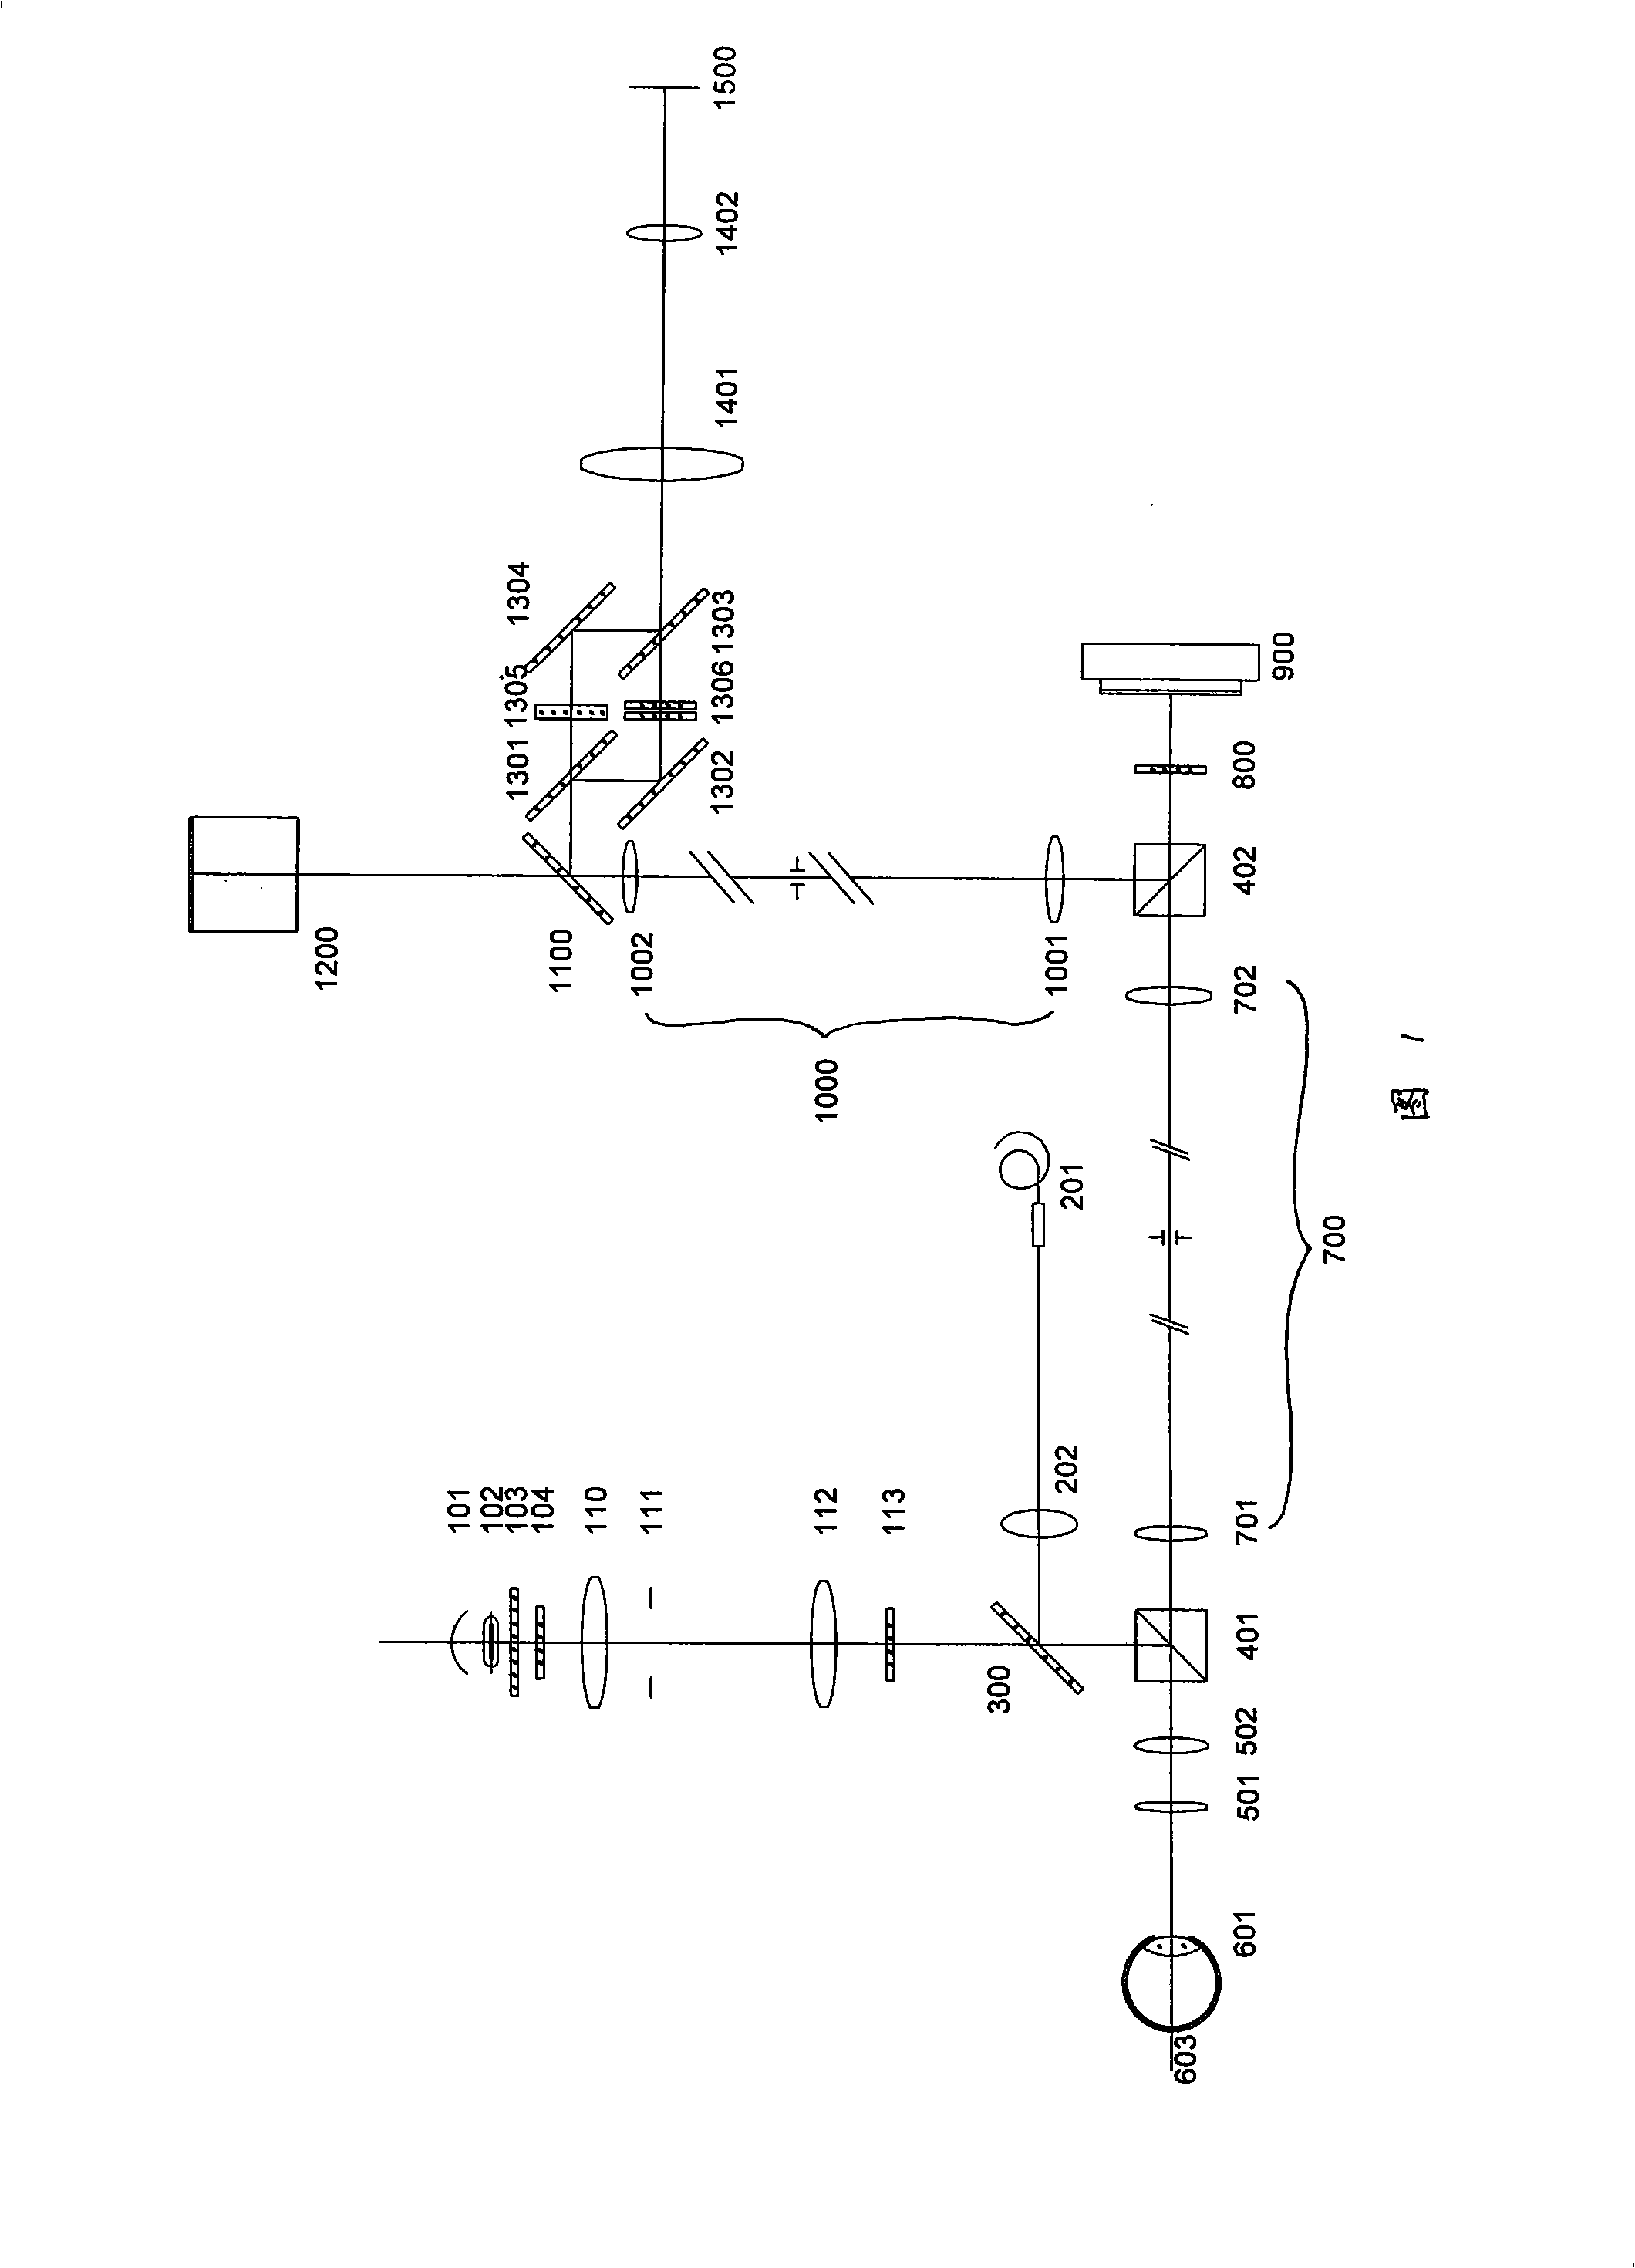 Retina cell microscopic imaging system with optical system for eliminating false light